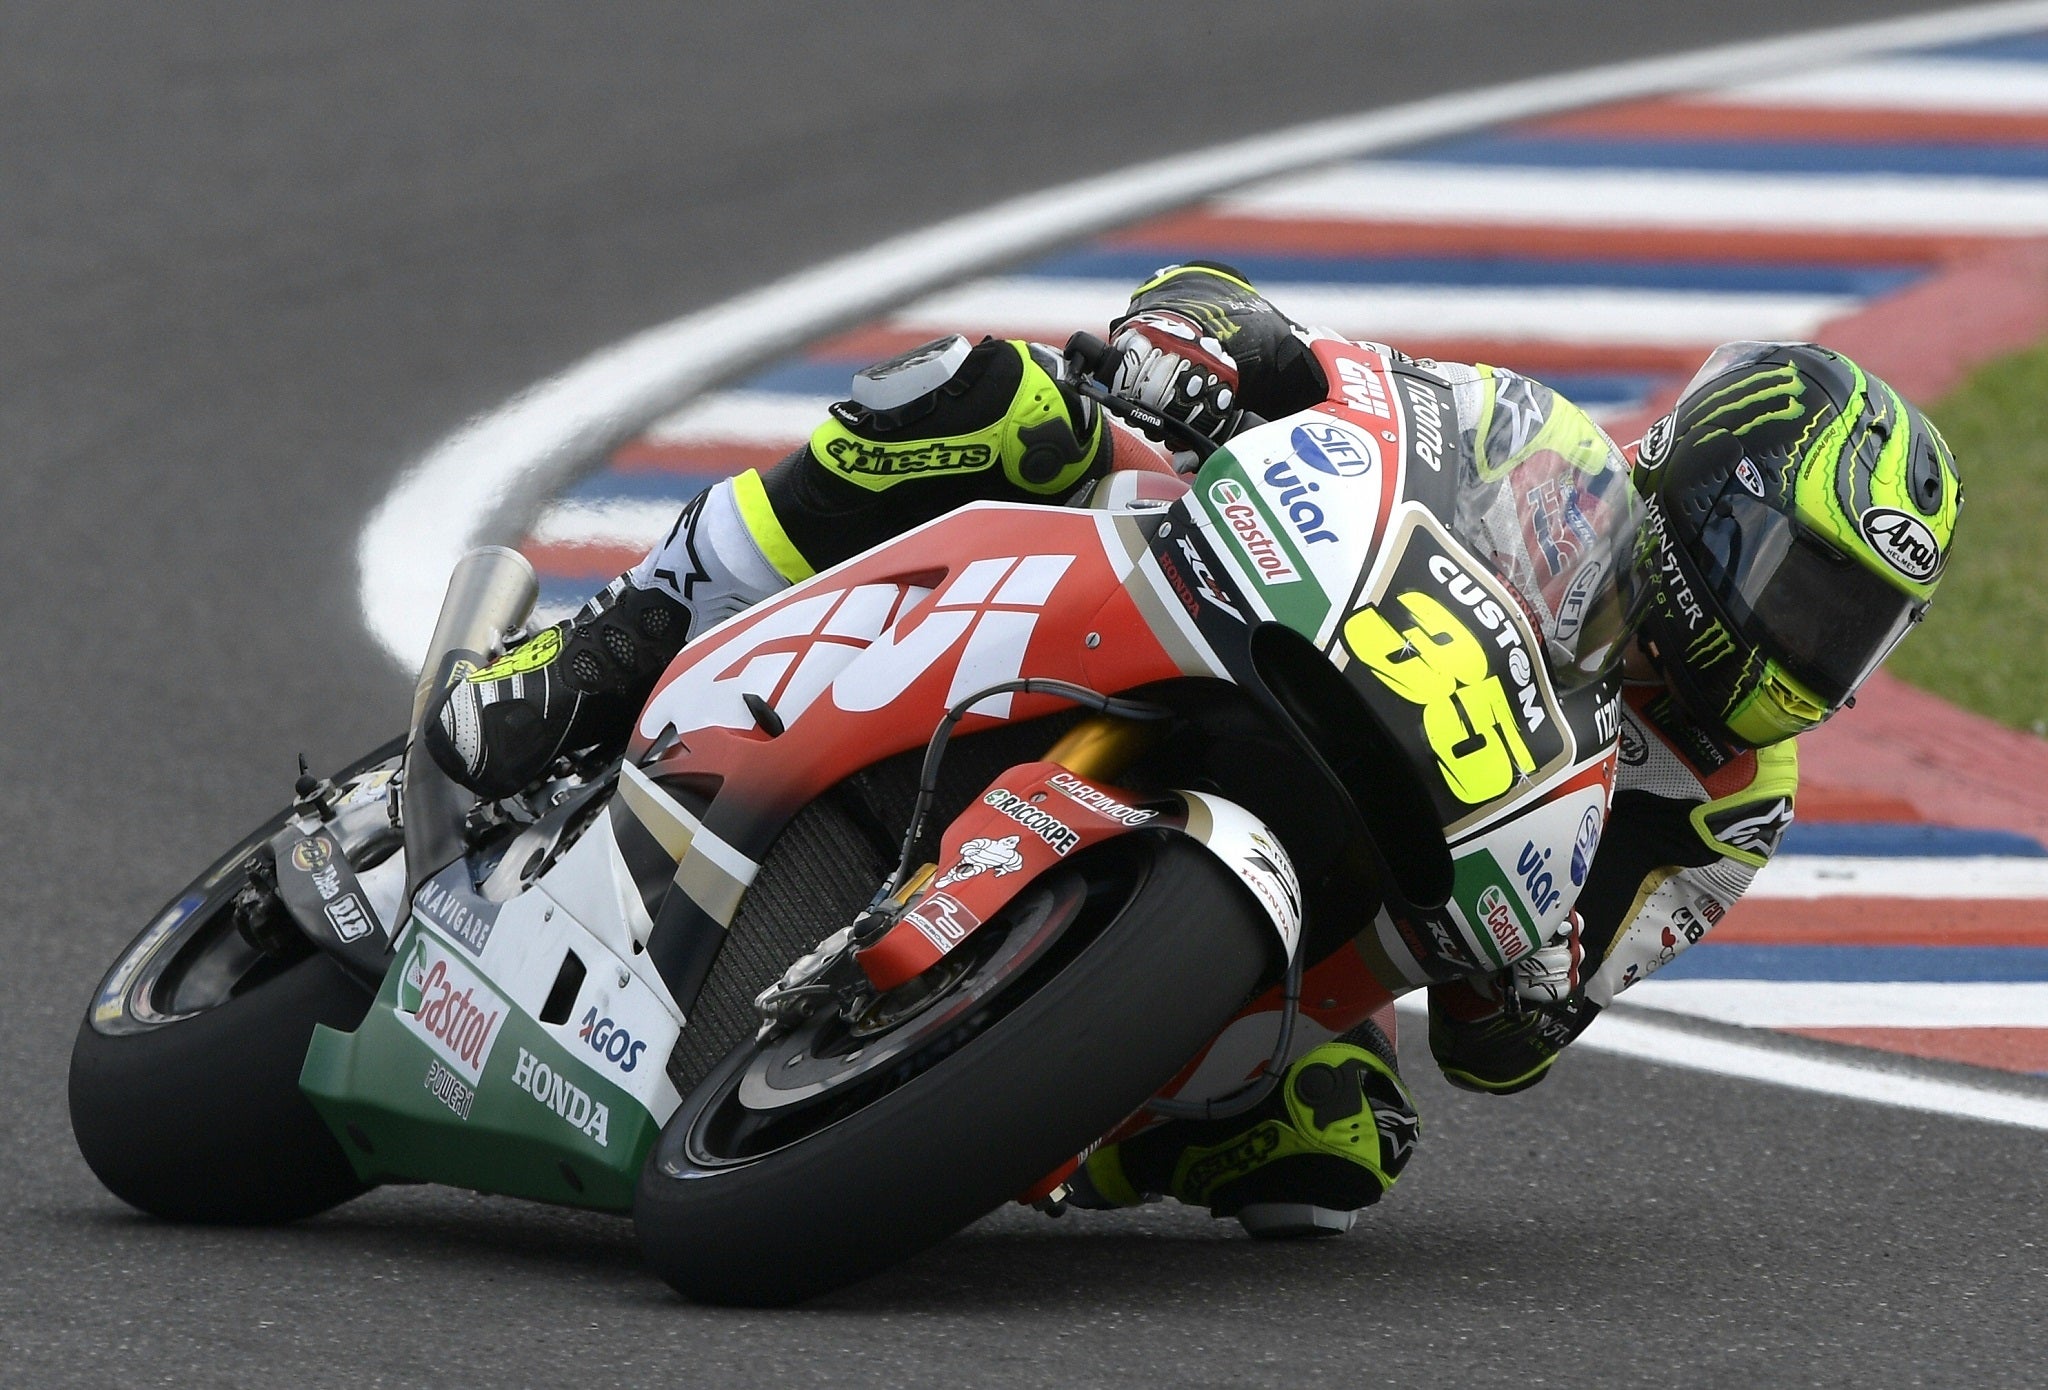 Cal Crutchlow secured his first points of the season by finishing third